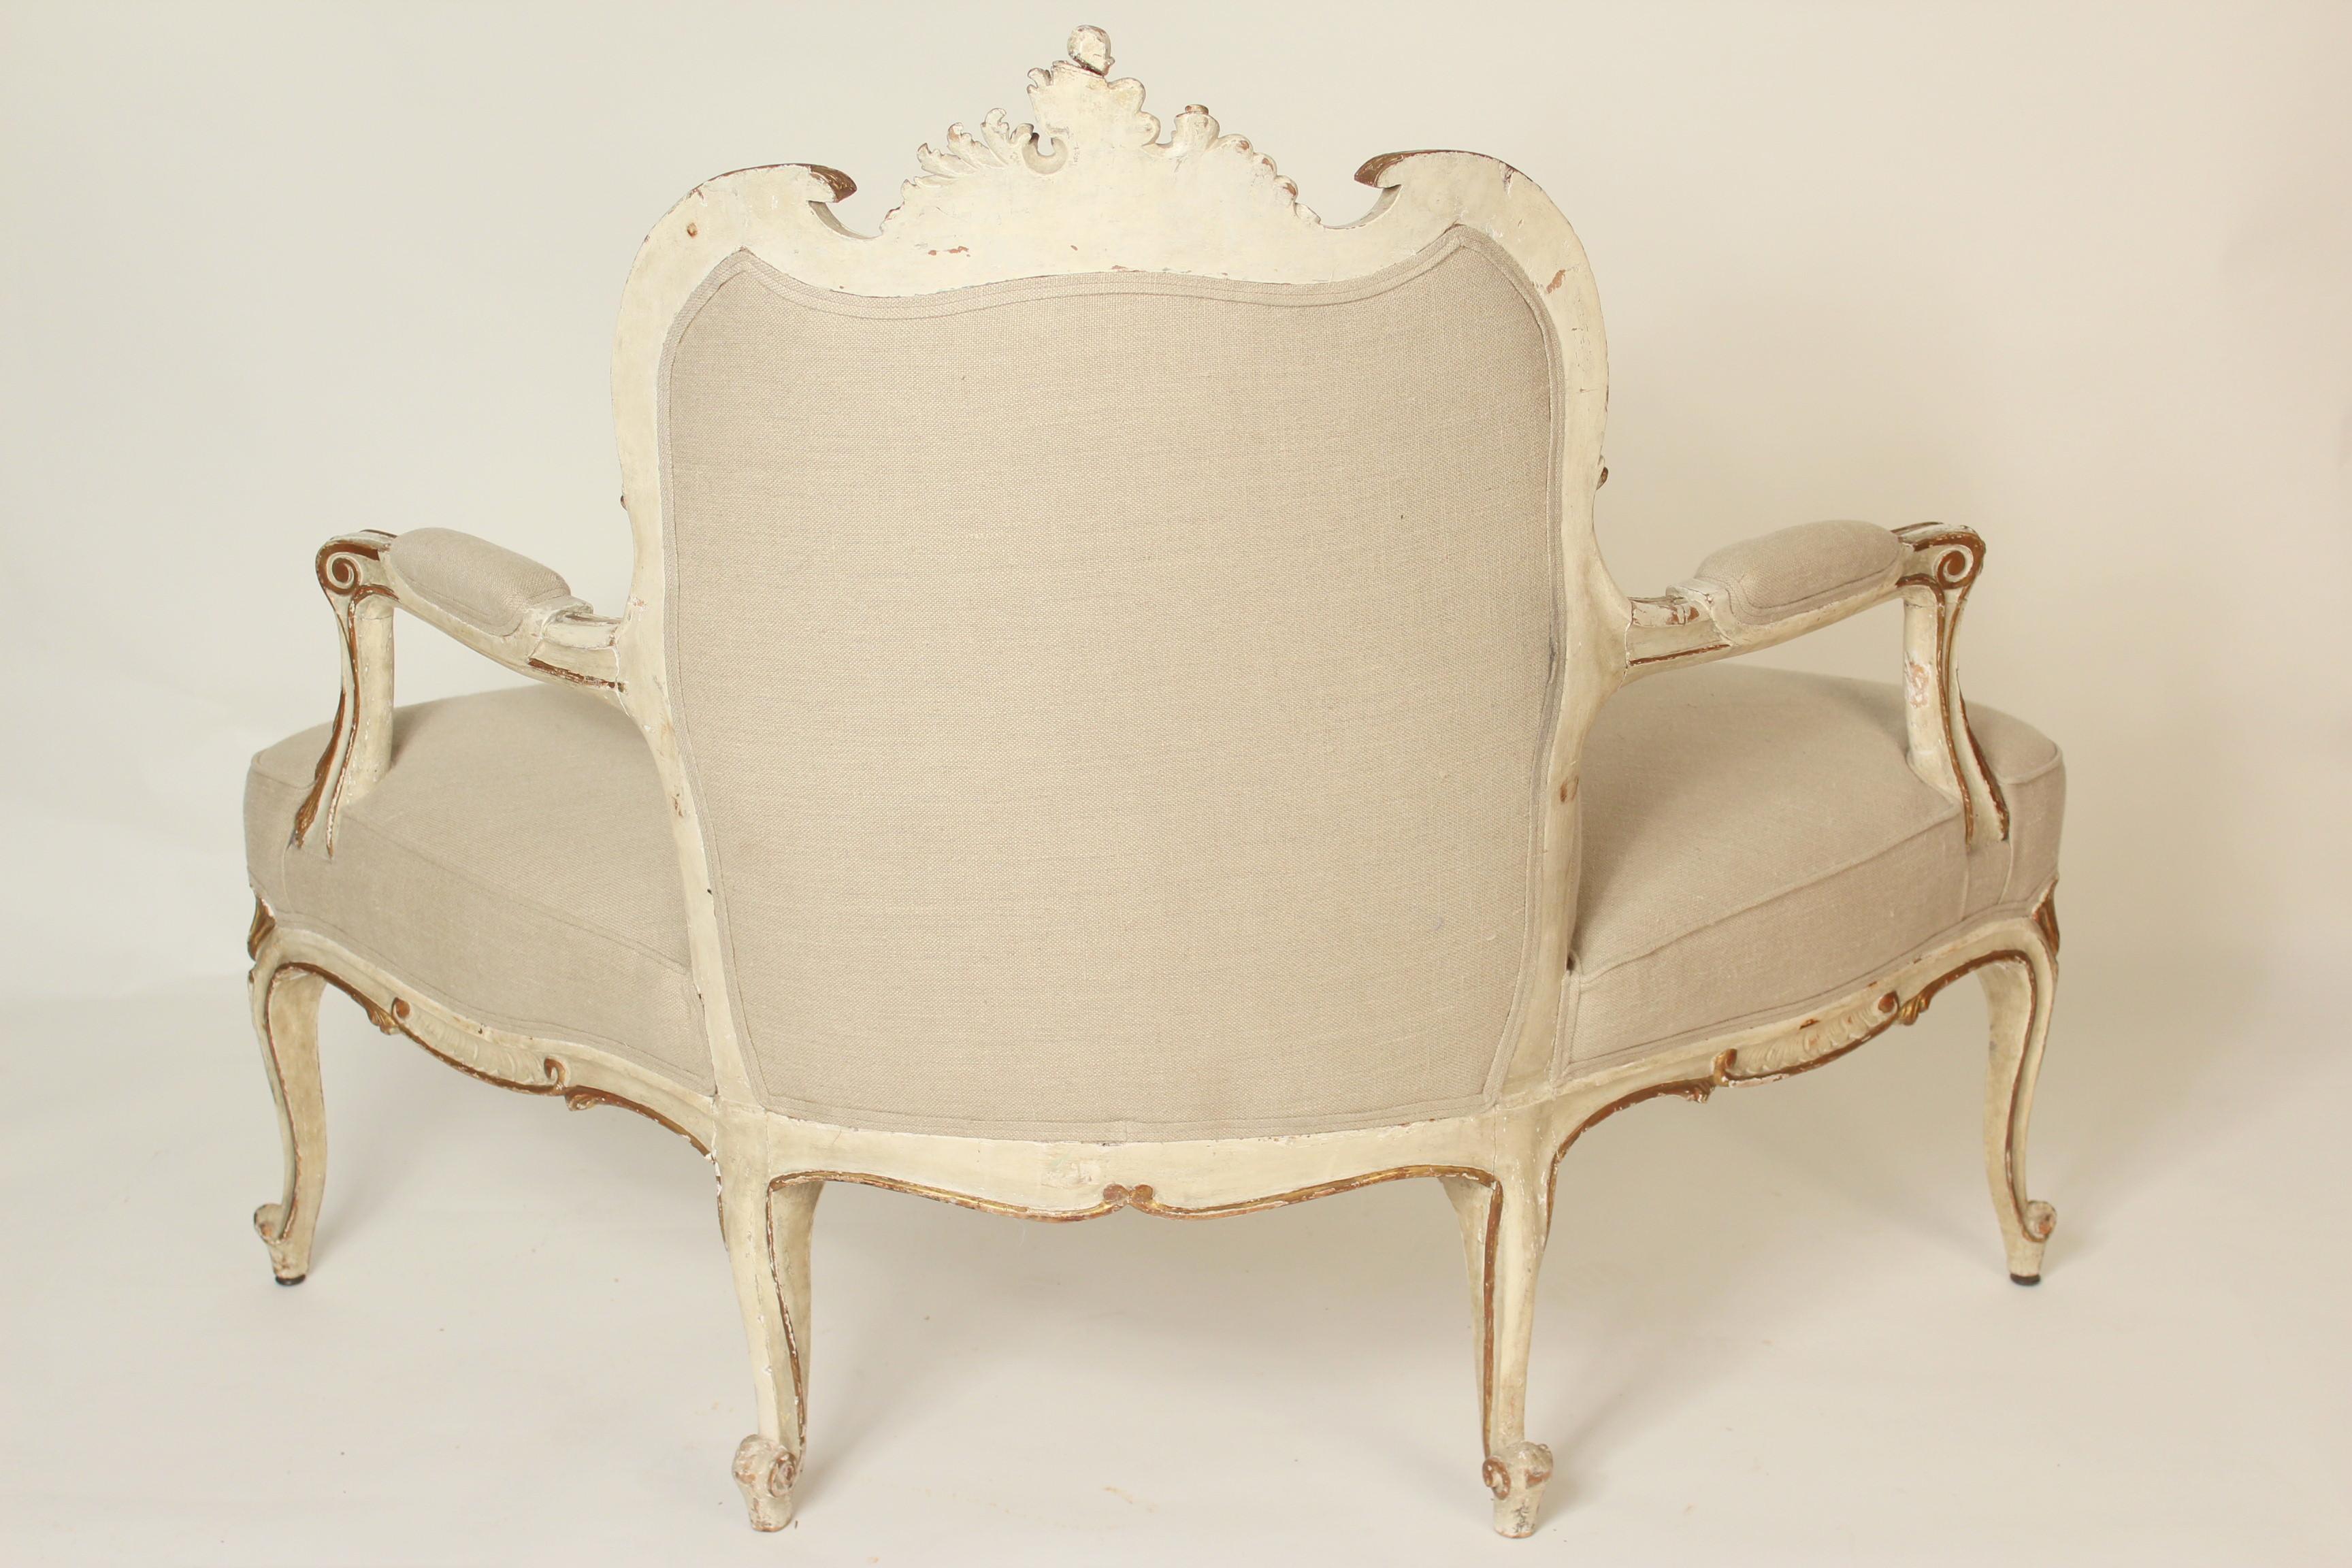 19th Century Continental Louis XV Style Painted and Gilt Decorated Settee